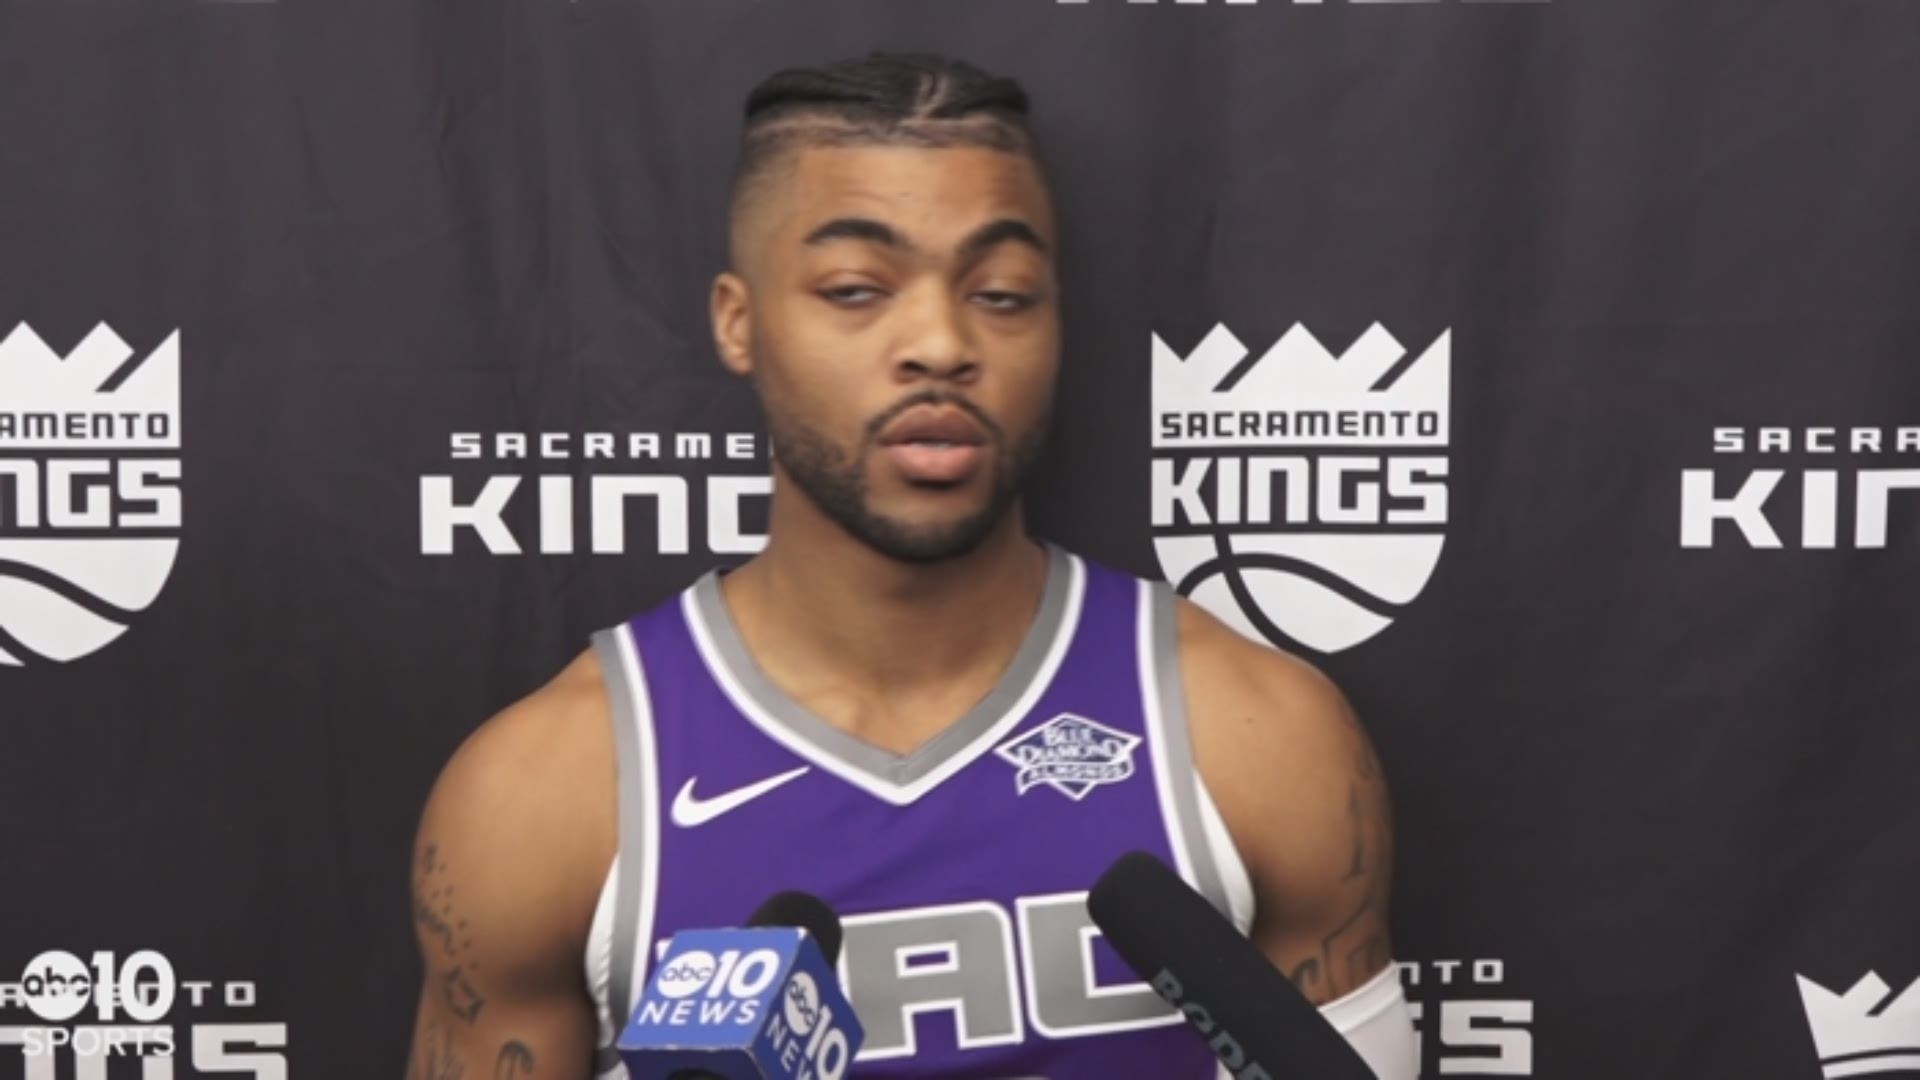 Kings point guard Frank Mason III on stepping into his second NBA season, his summer experience with Team USA Basketball and moving the ball more within a quicker offense.